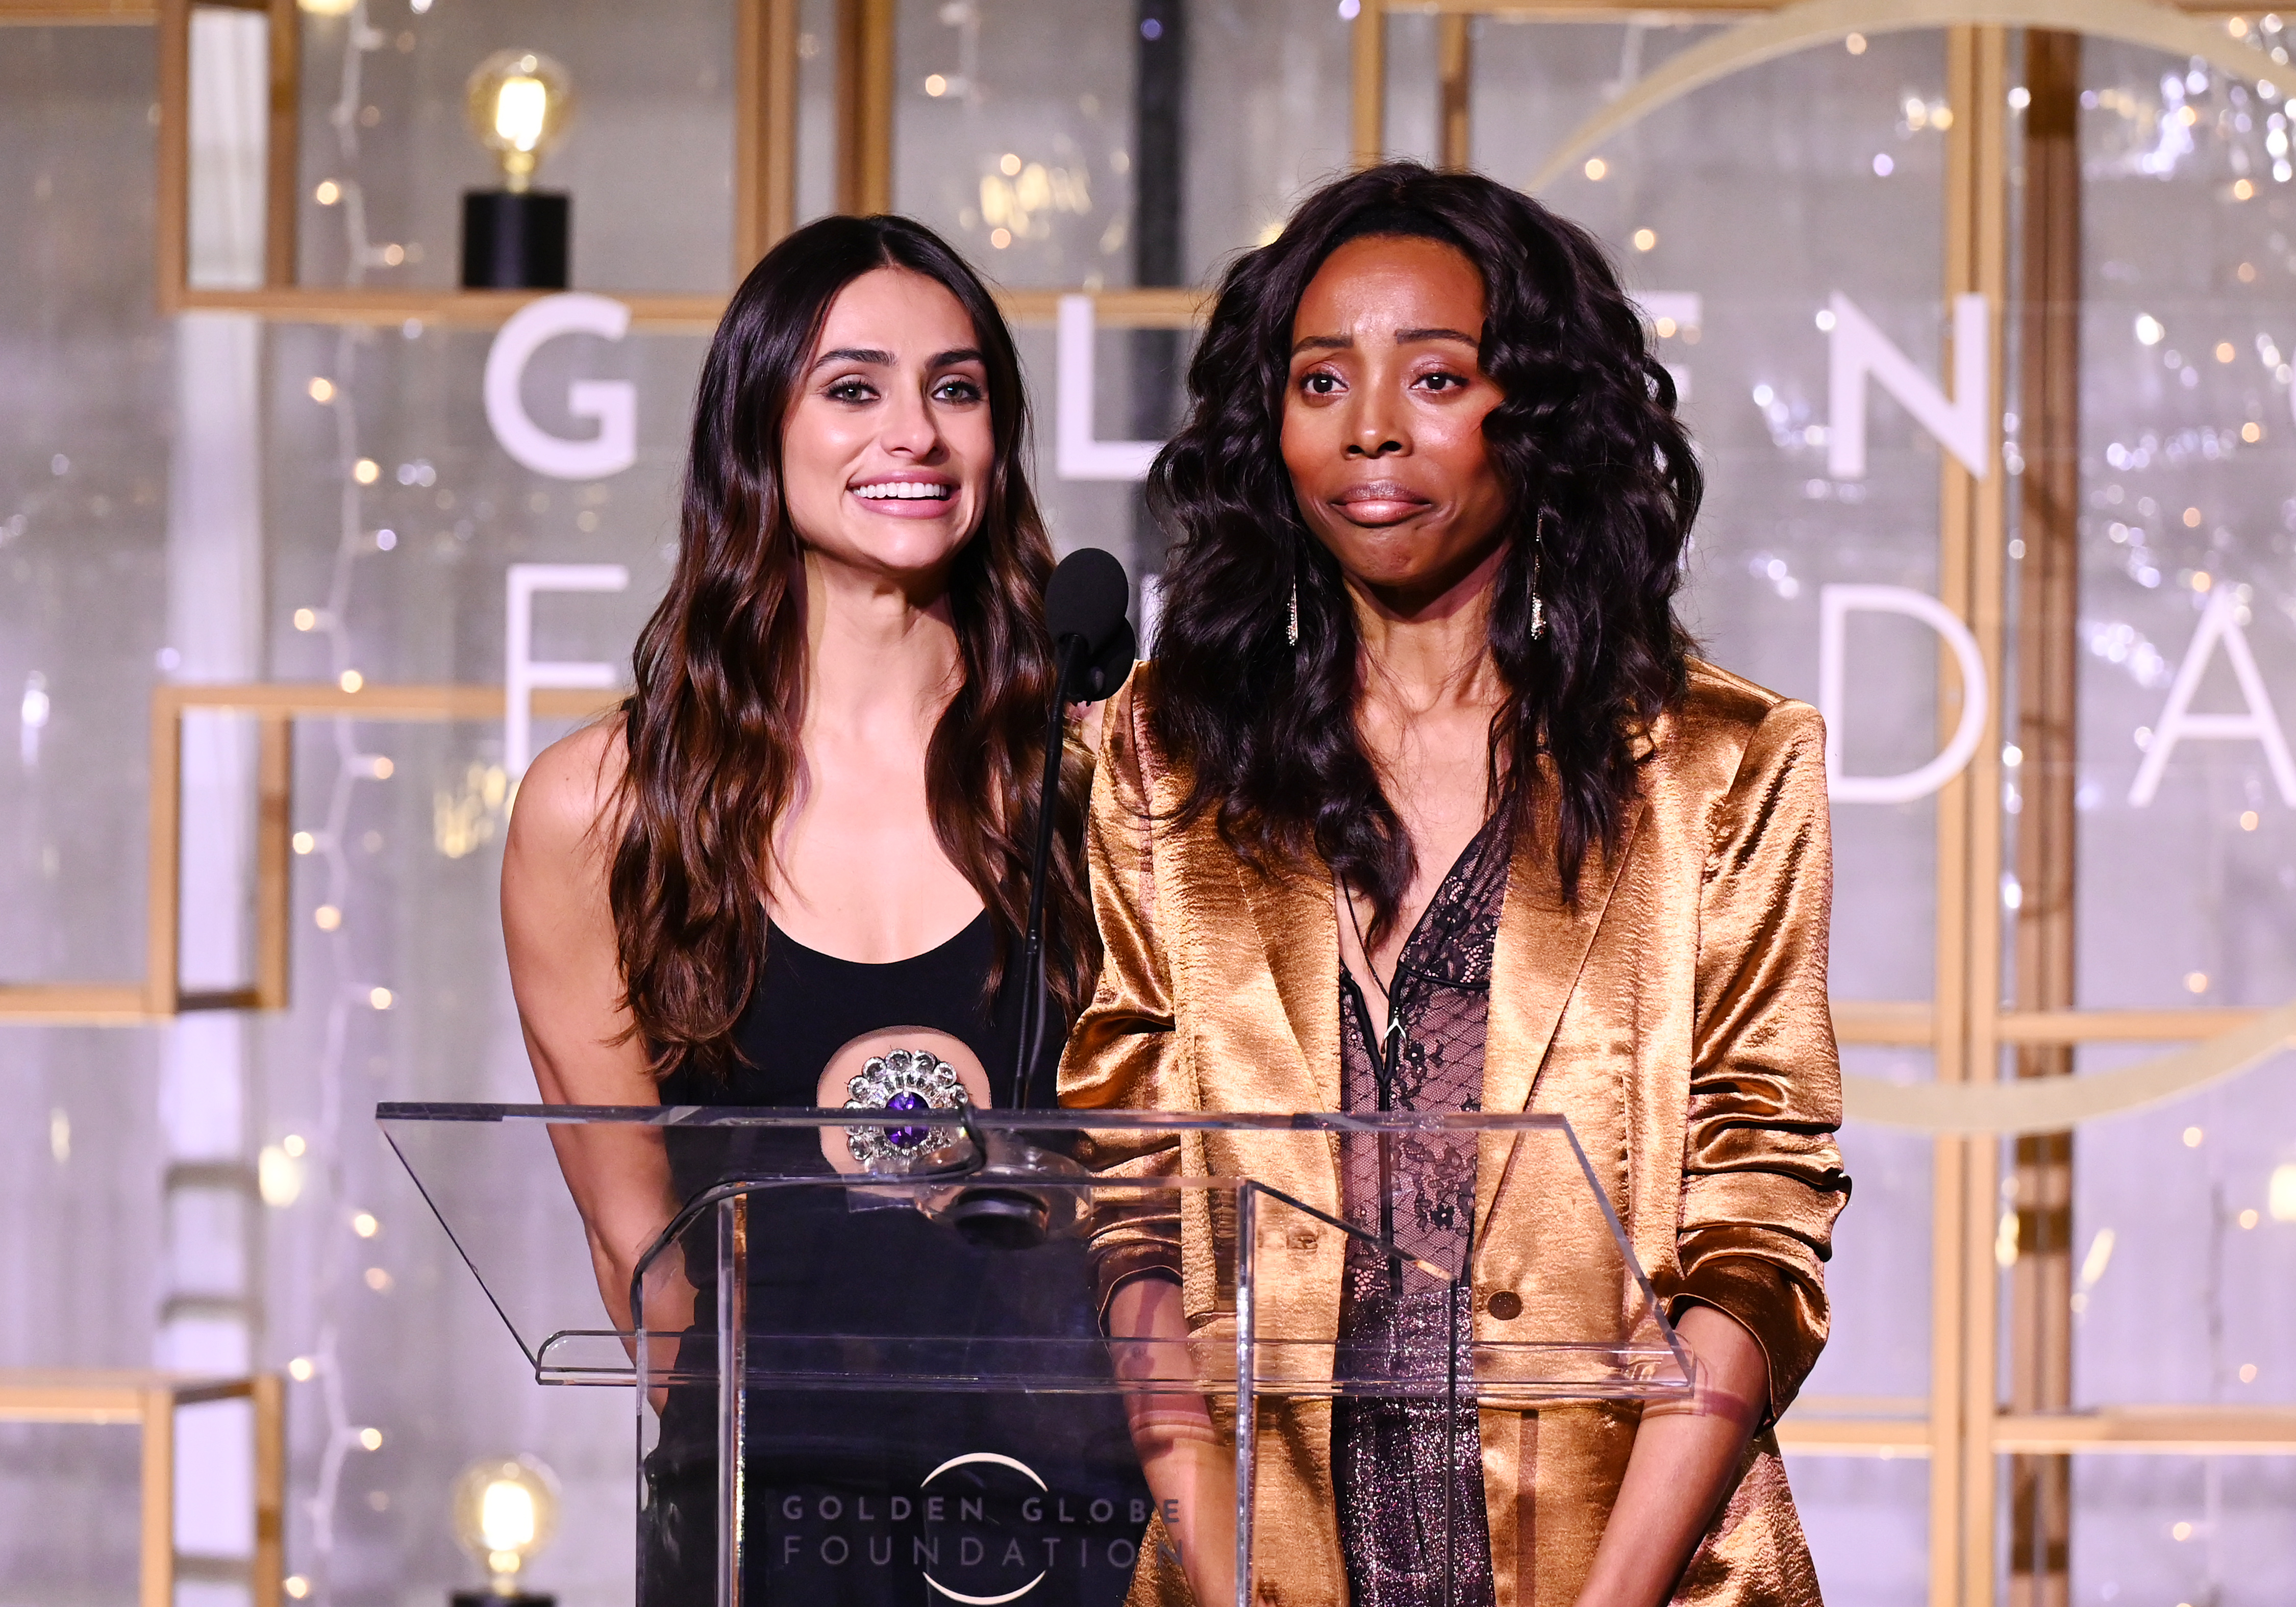 Renata Notni and Erica Ash at the Golden Globe Foundation Dinner held at the Beverly Hilton in January